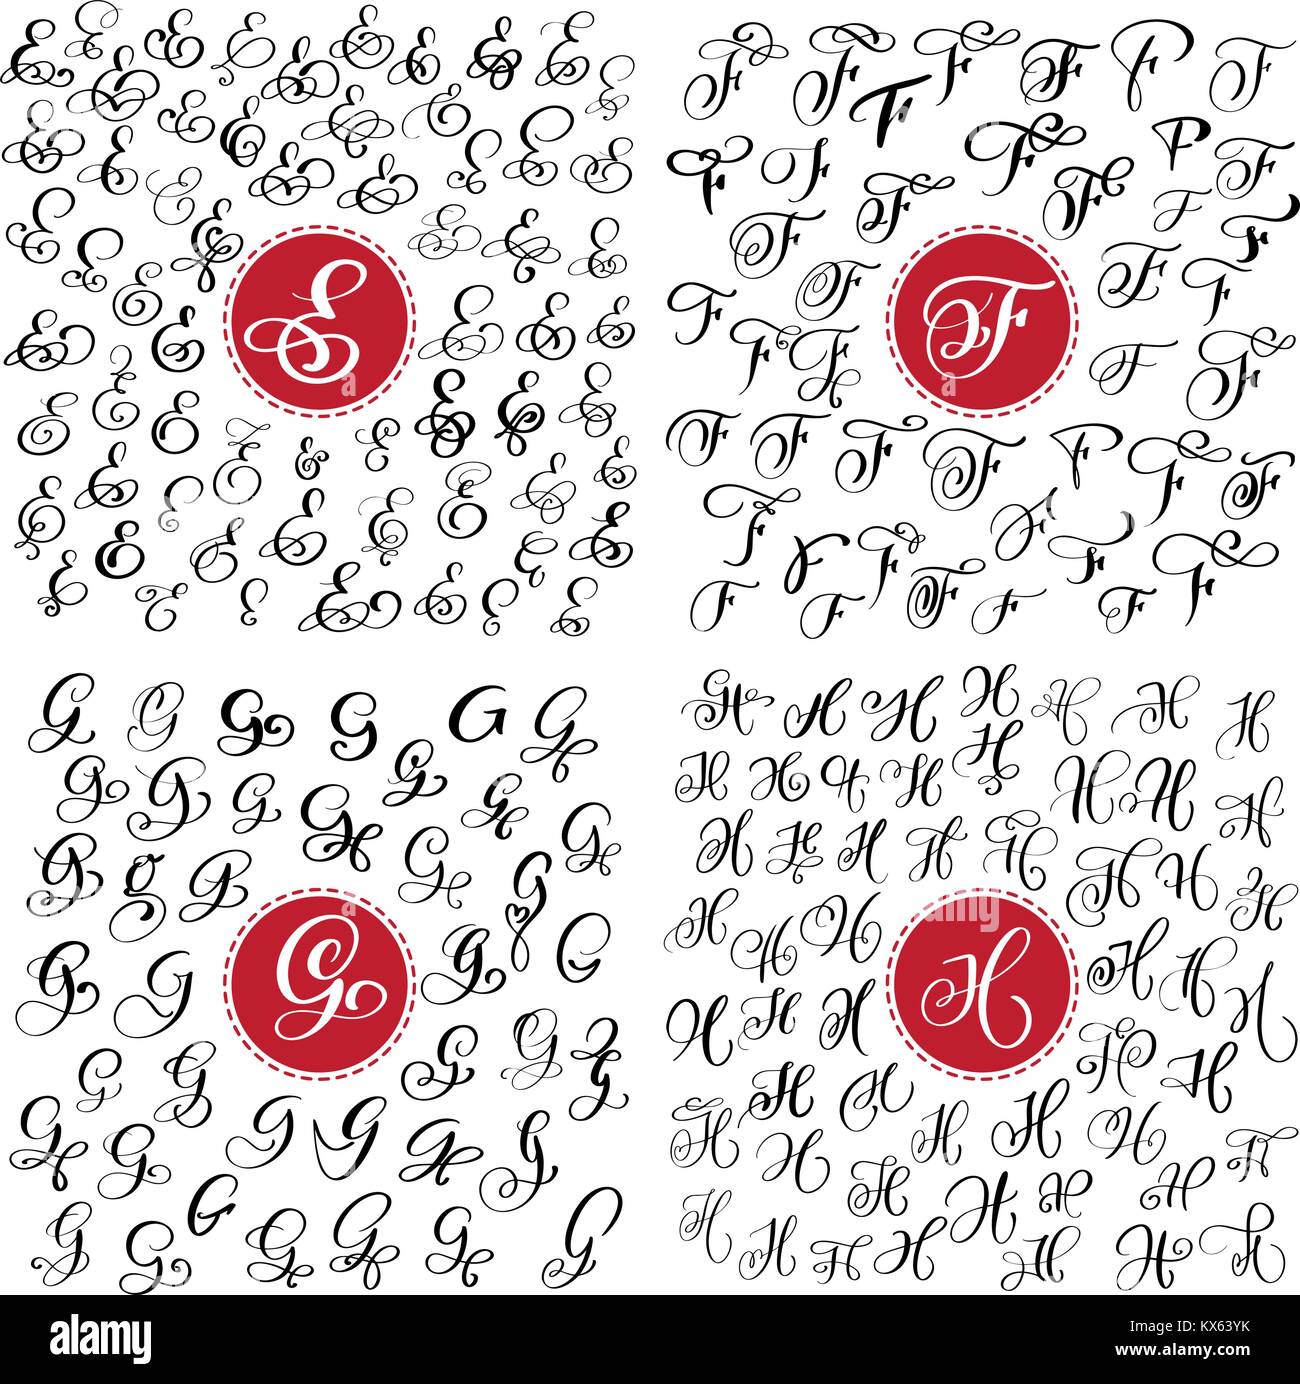 big Set of Hand drawn vector calligraphy letter E, F, G, H. Script font. Isolated letters written with ink. Handwritten brush style. Hand lettering for logos packaging design poster Stock Vector